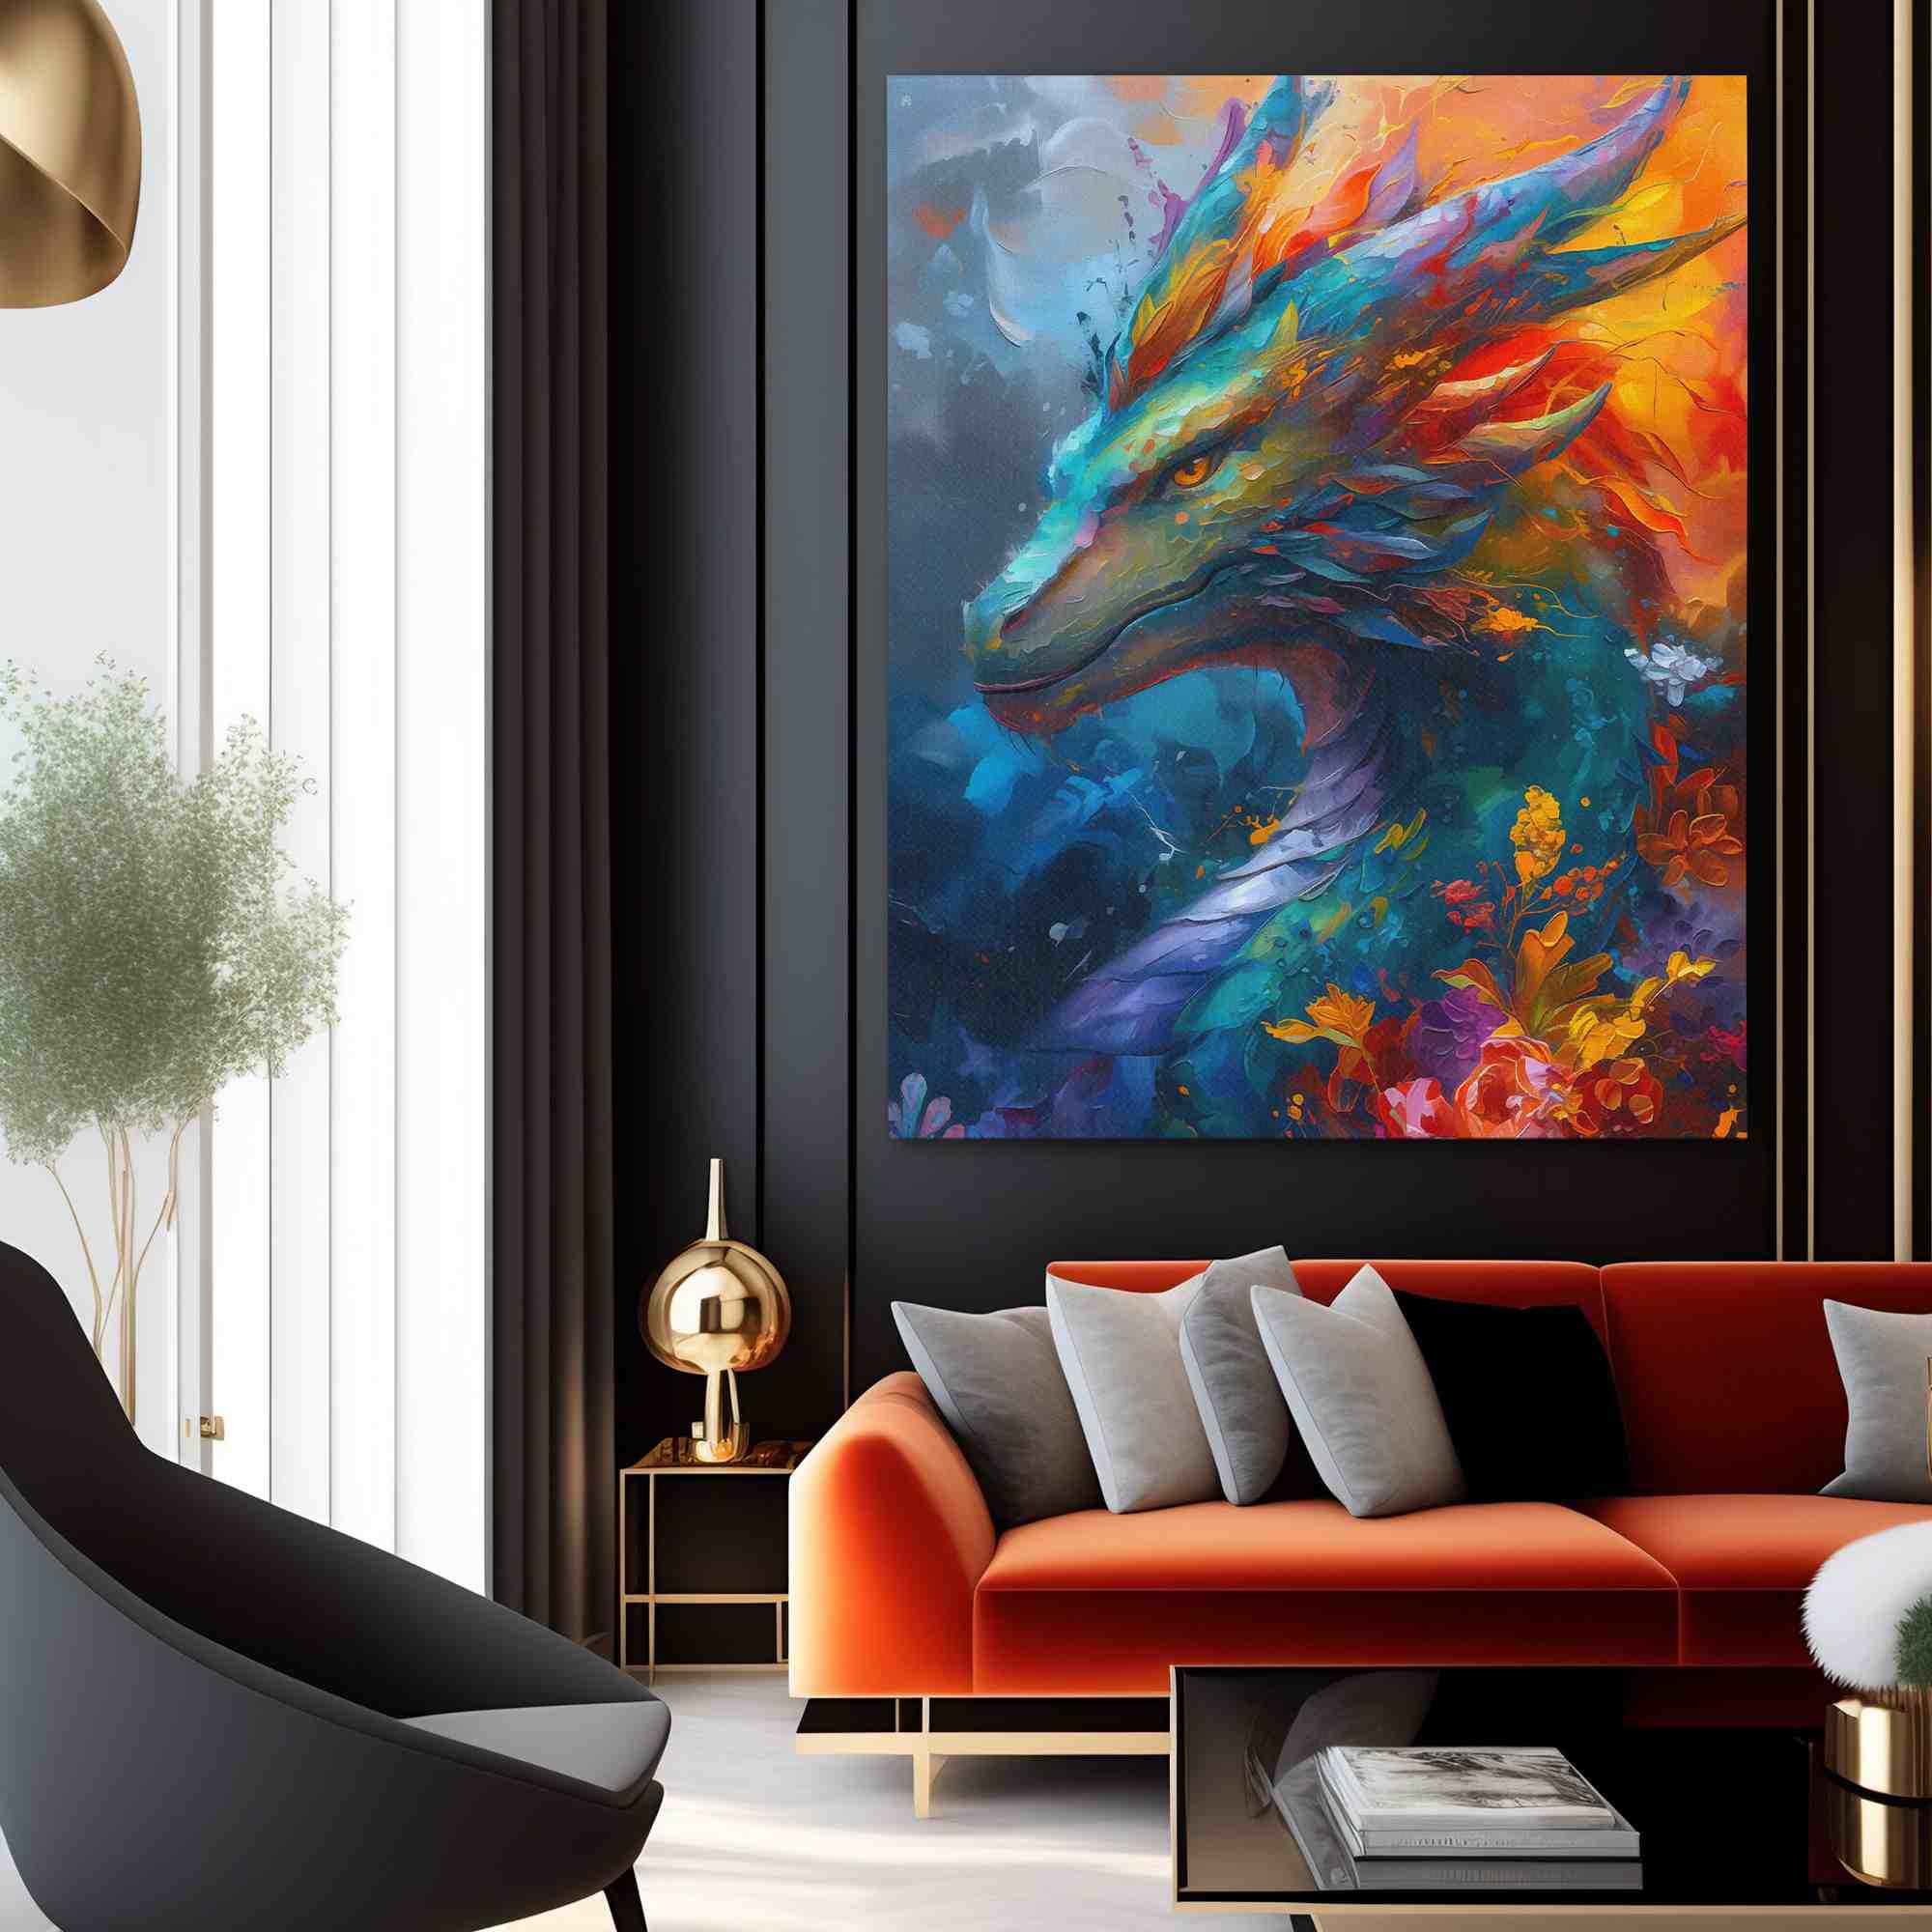 a painting of a colorful dragon on a canvas